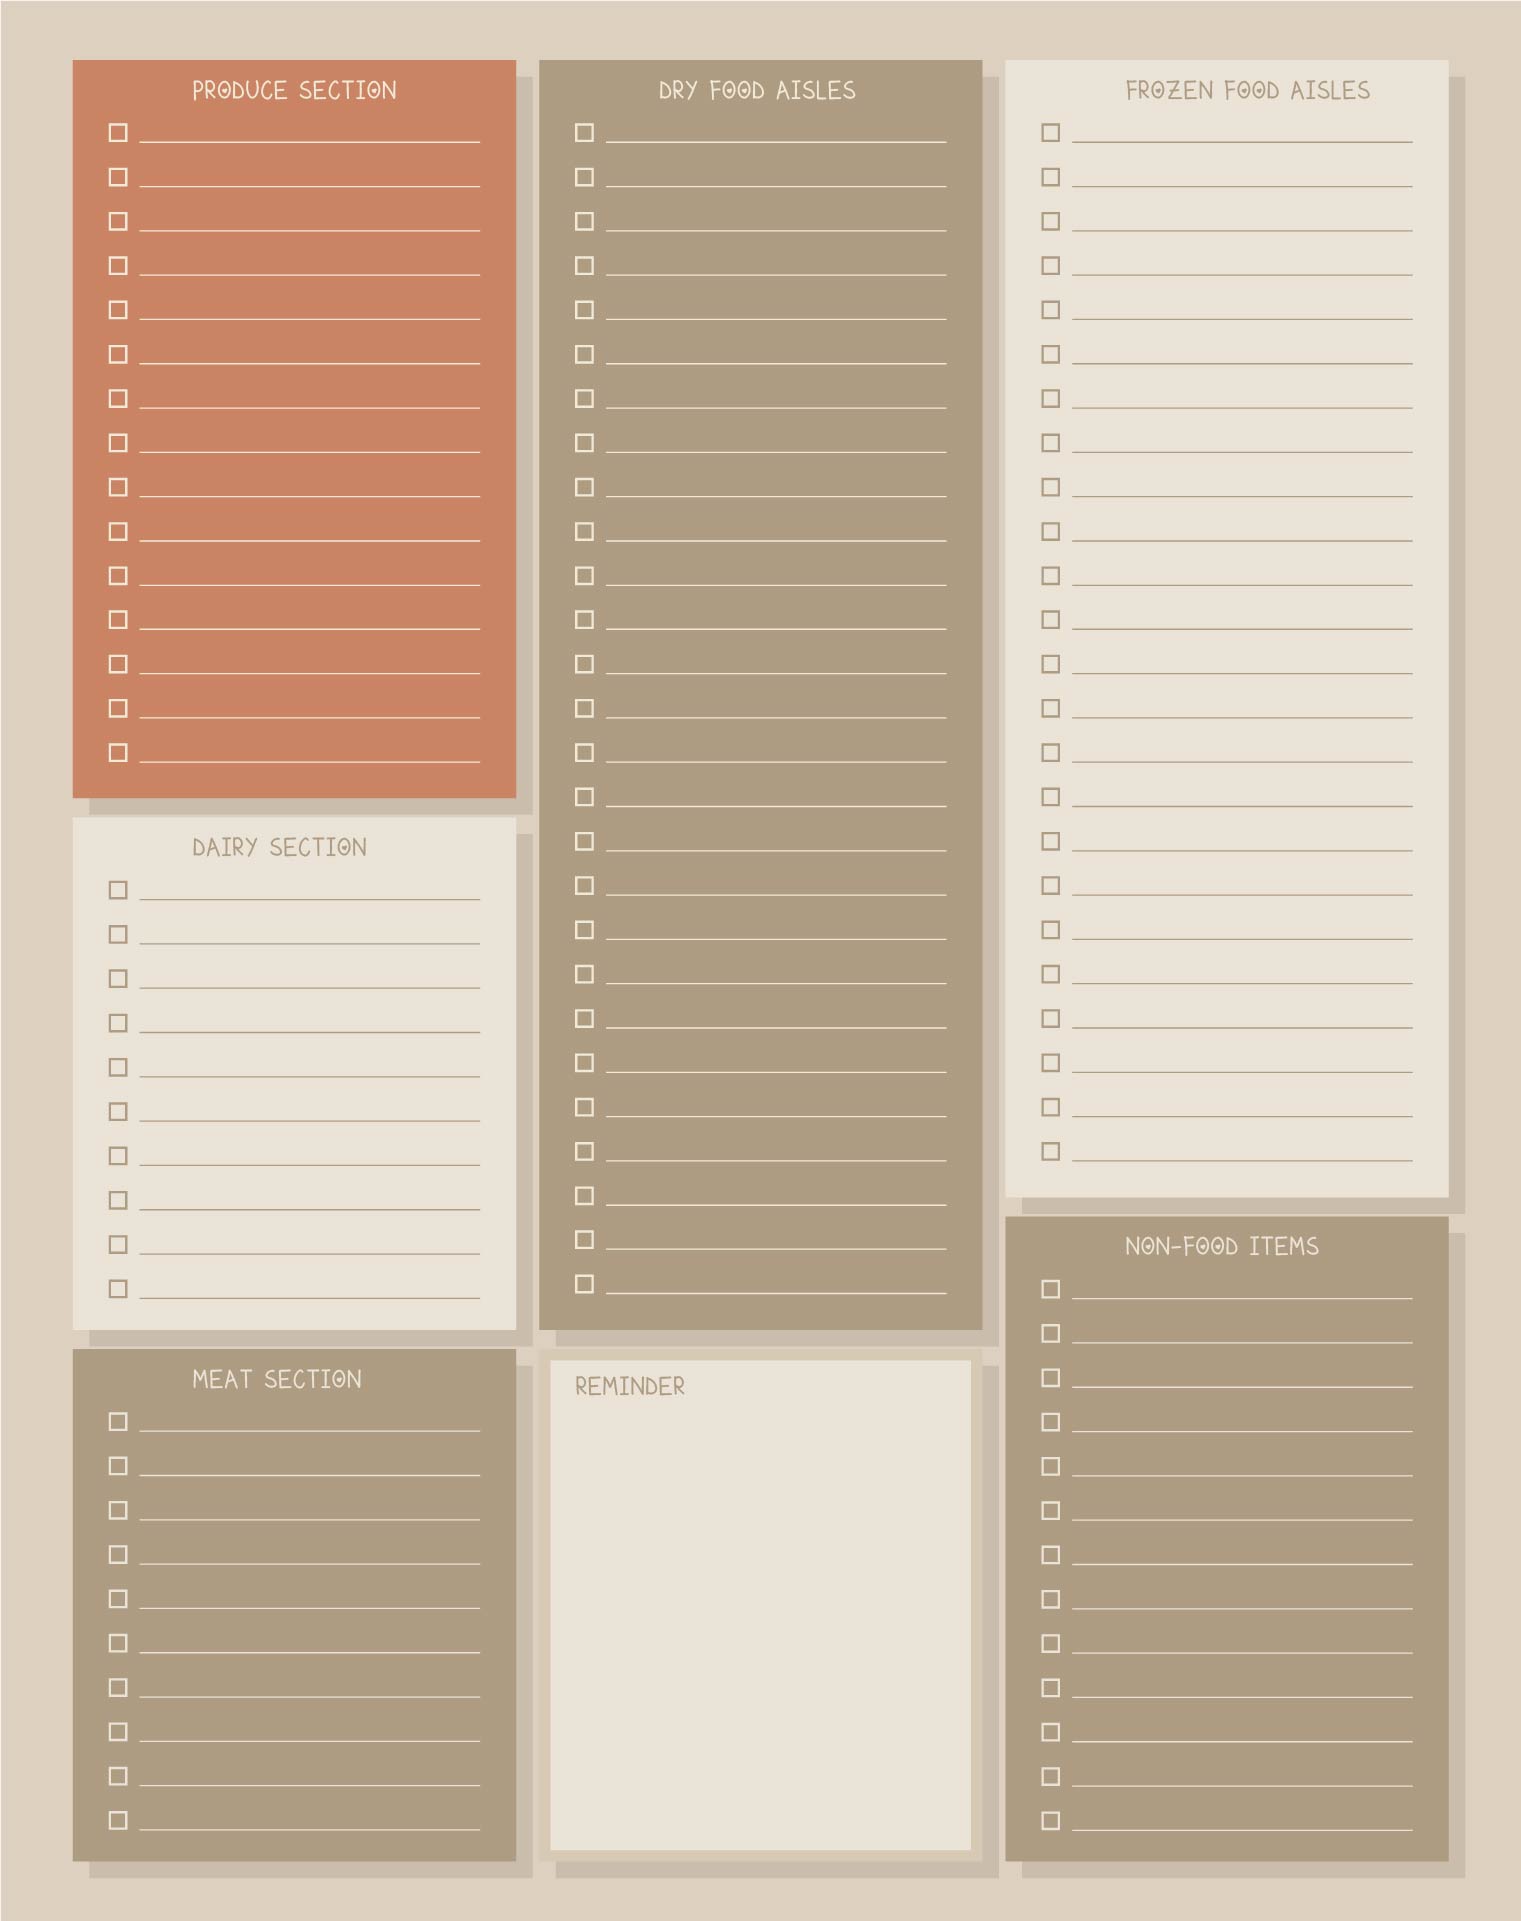 7-best-images-of-grocery-list-template-printable-amenable-blank